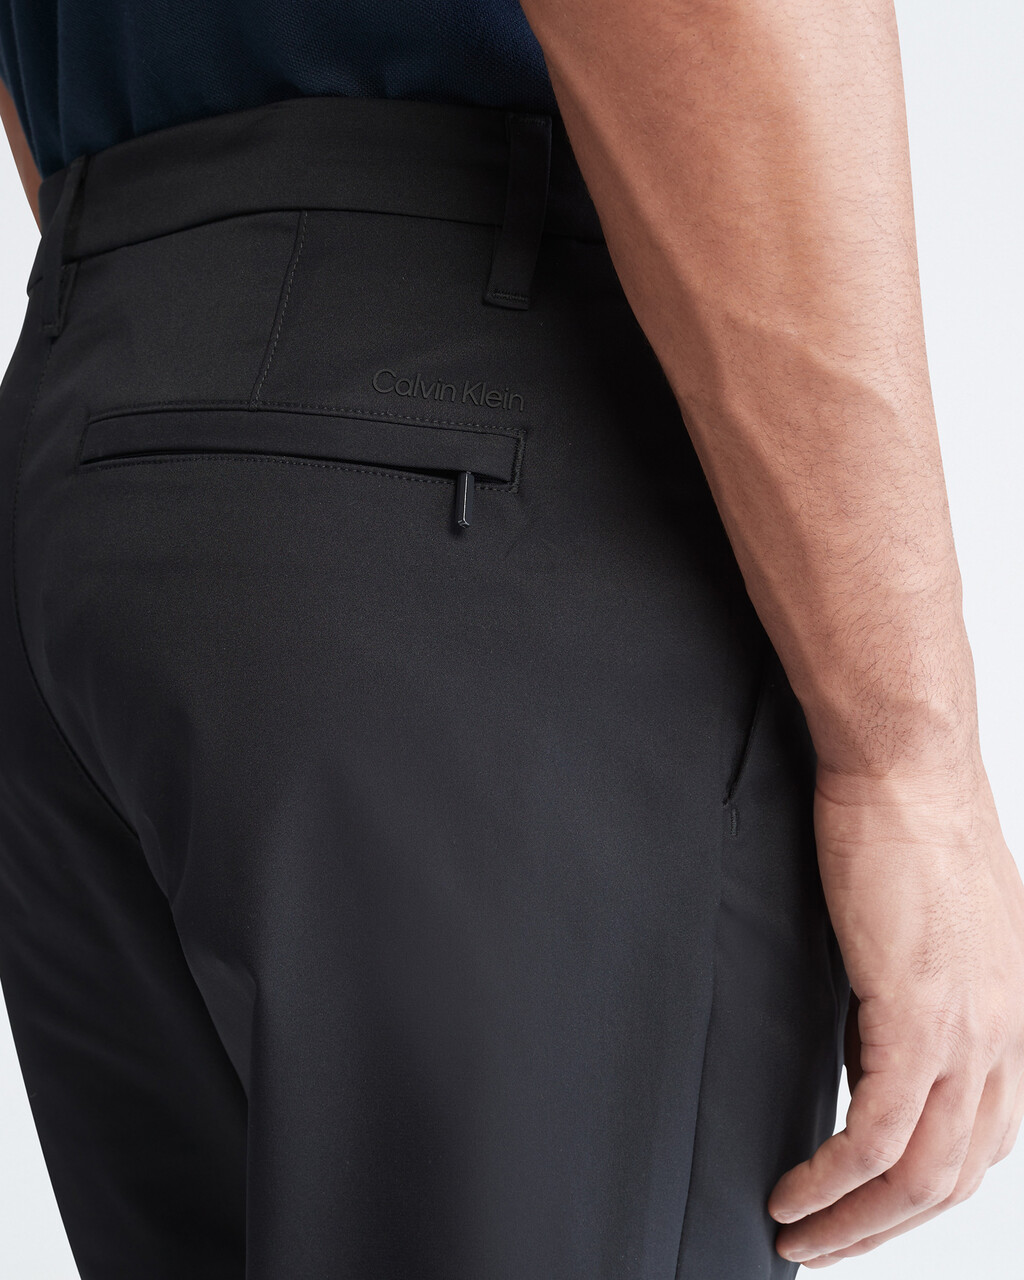 CALVIN KLEIN ATHLETIC SLIM STRETCH WOVEN CHINOS, Black Beauty, hi-res